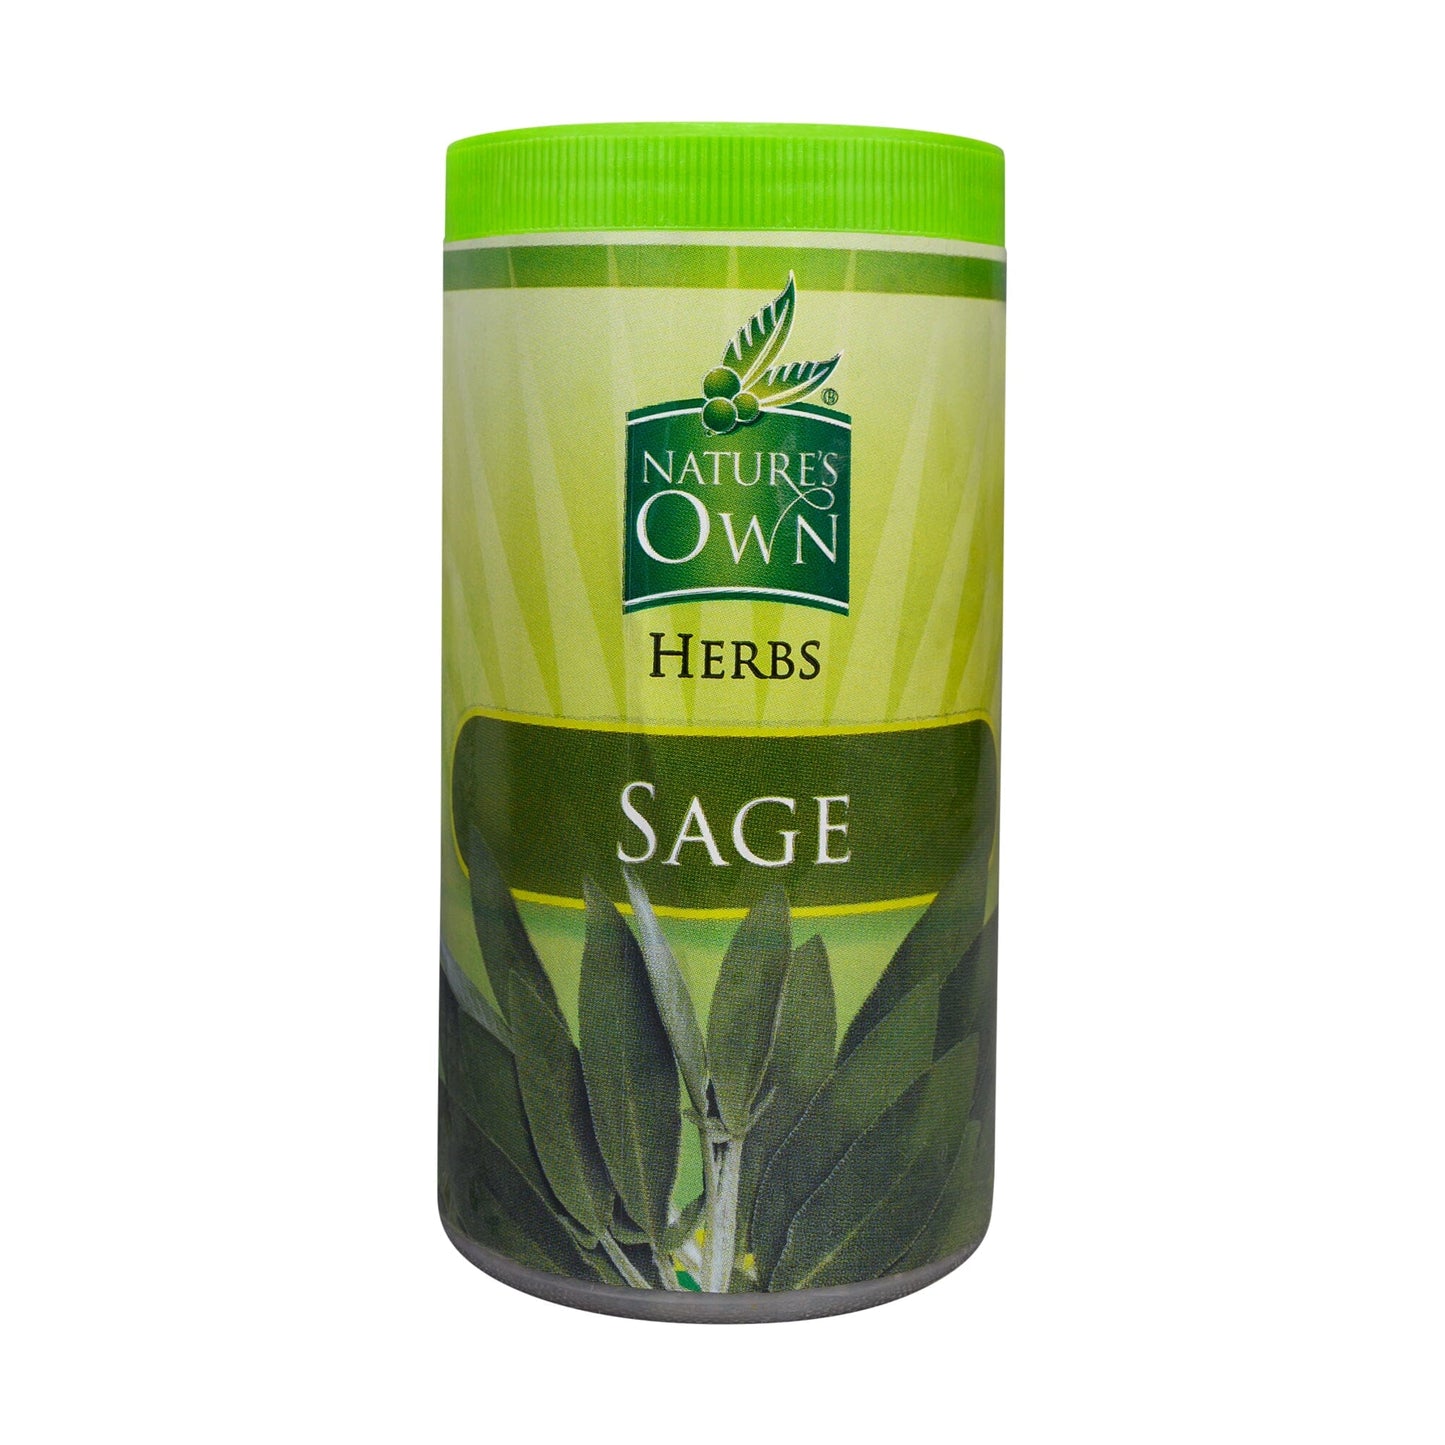 Nature's Own Herbs Sage